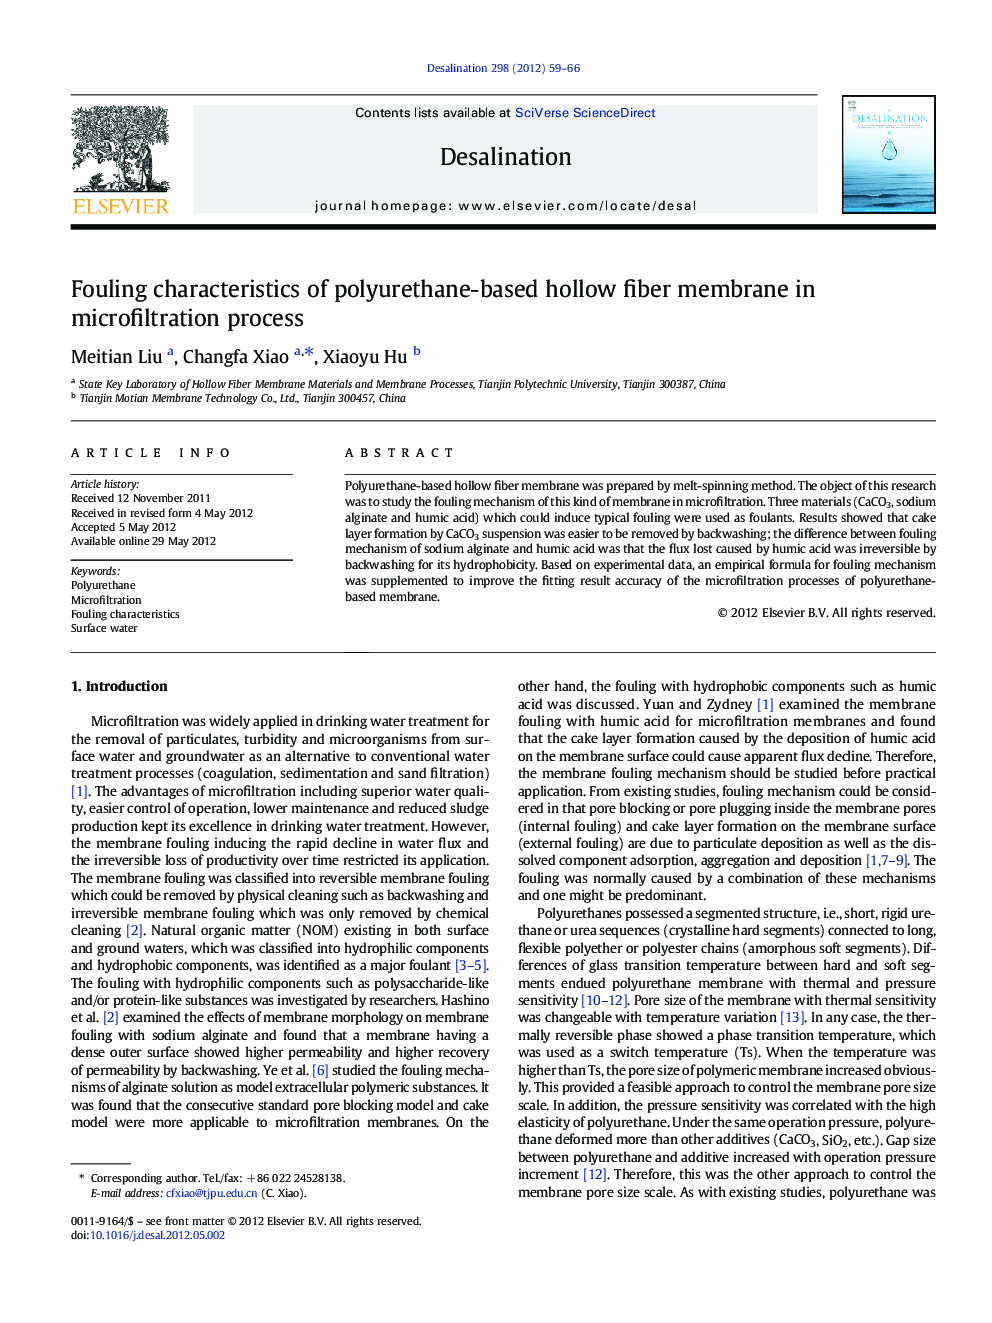 Fouling characteristics of polyurethane-based hollow fiber membrane in microfiltration process